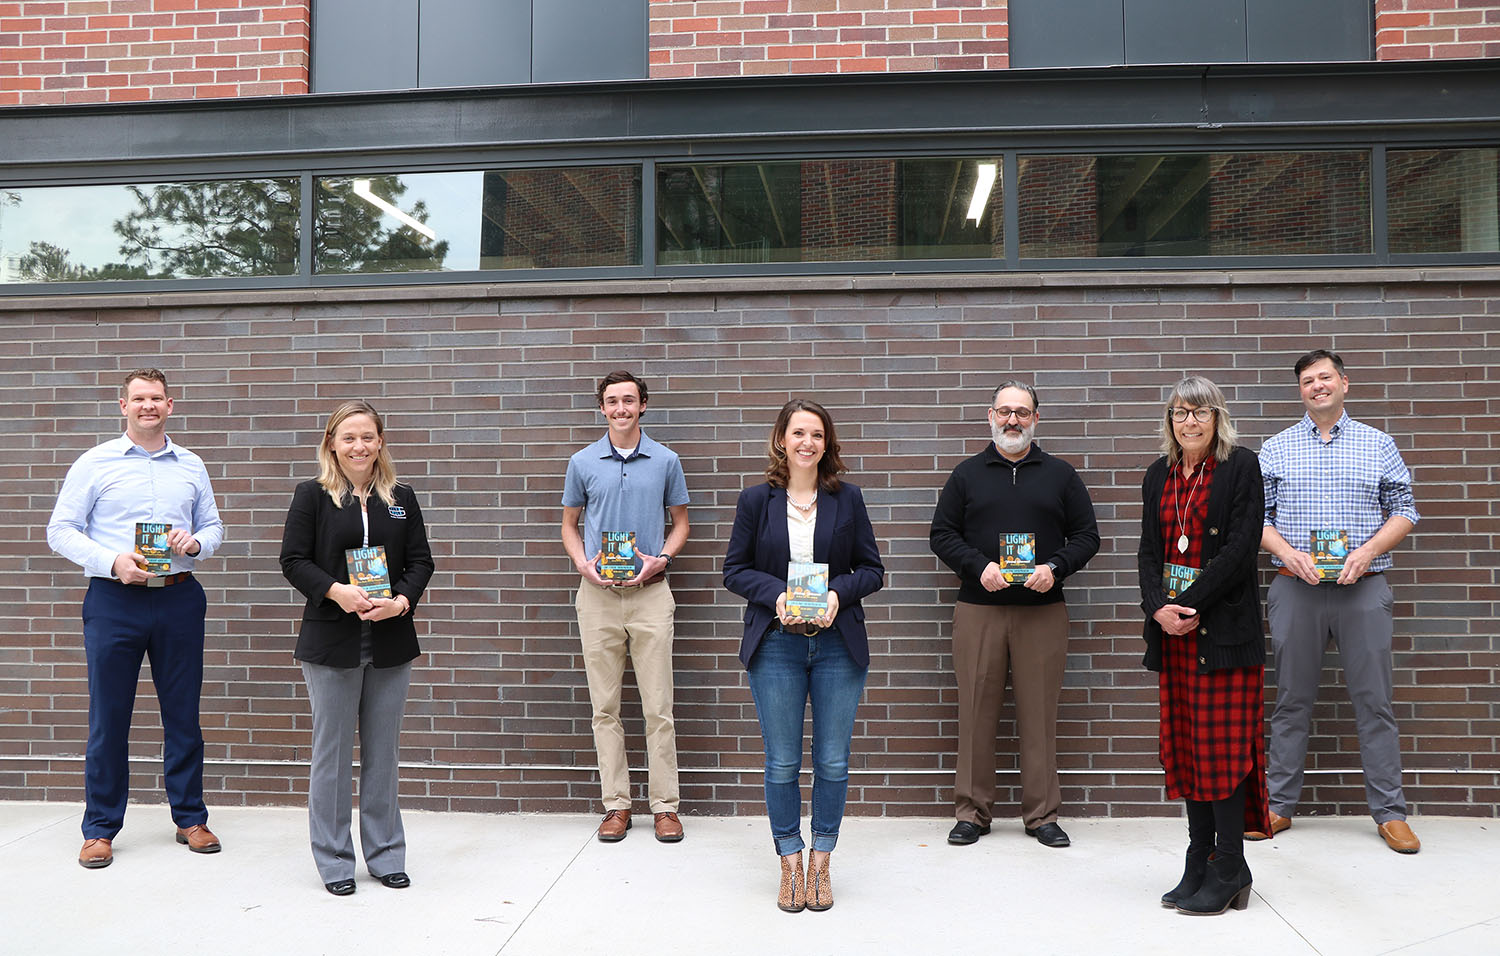 UNK’s Center for Entrepreneurship and Rural Development presented its annual Light It Up awards last week. This year’s winners are, from left, Brian Blakely, Bobbi Pettit, Justin Vrooman, Stacey Johnson, Yousef Ghamedi, Jocelyn Johnson and Mike Anderson.